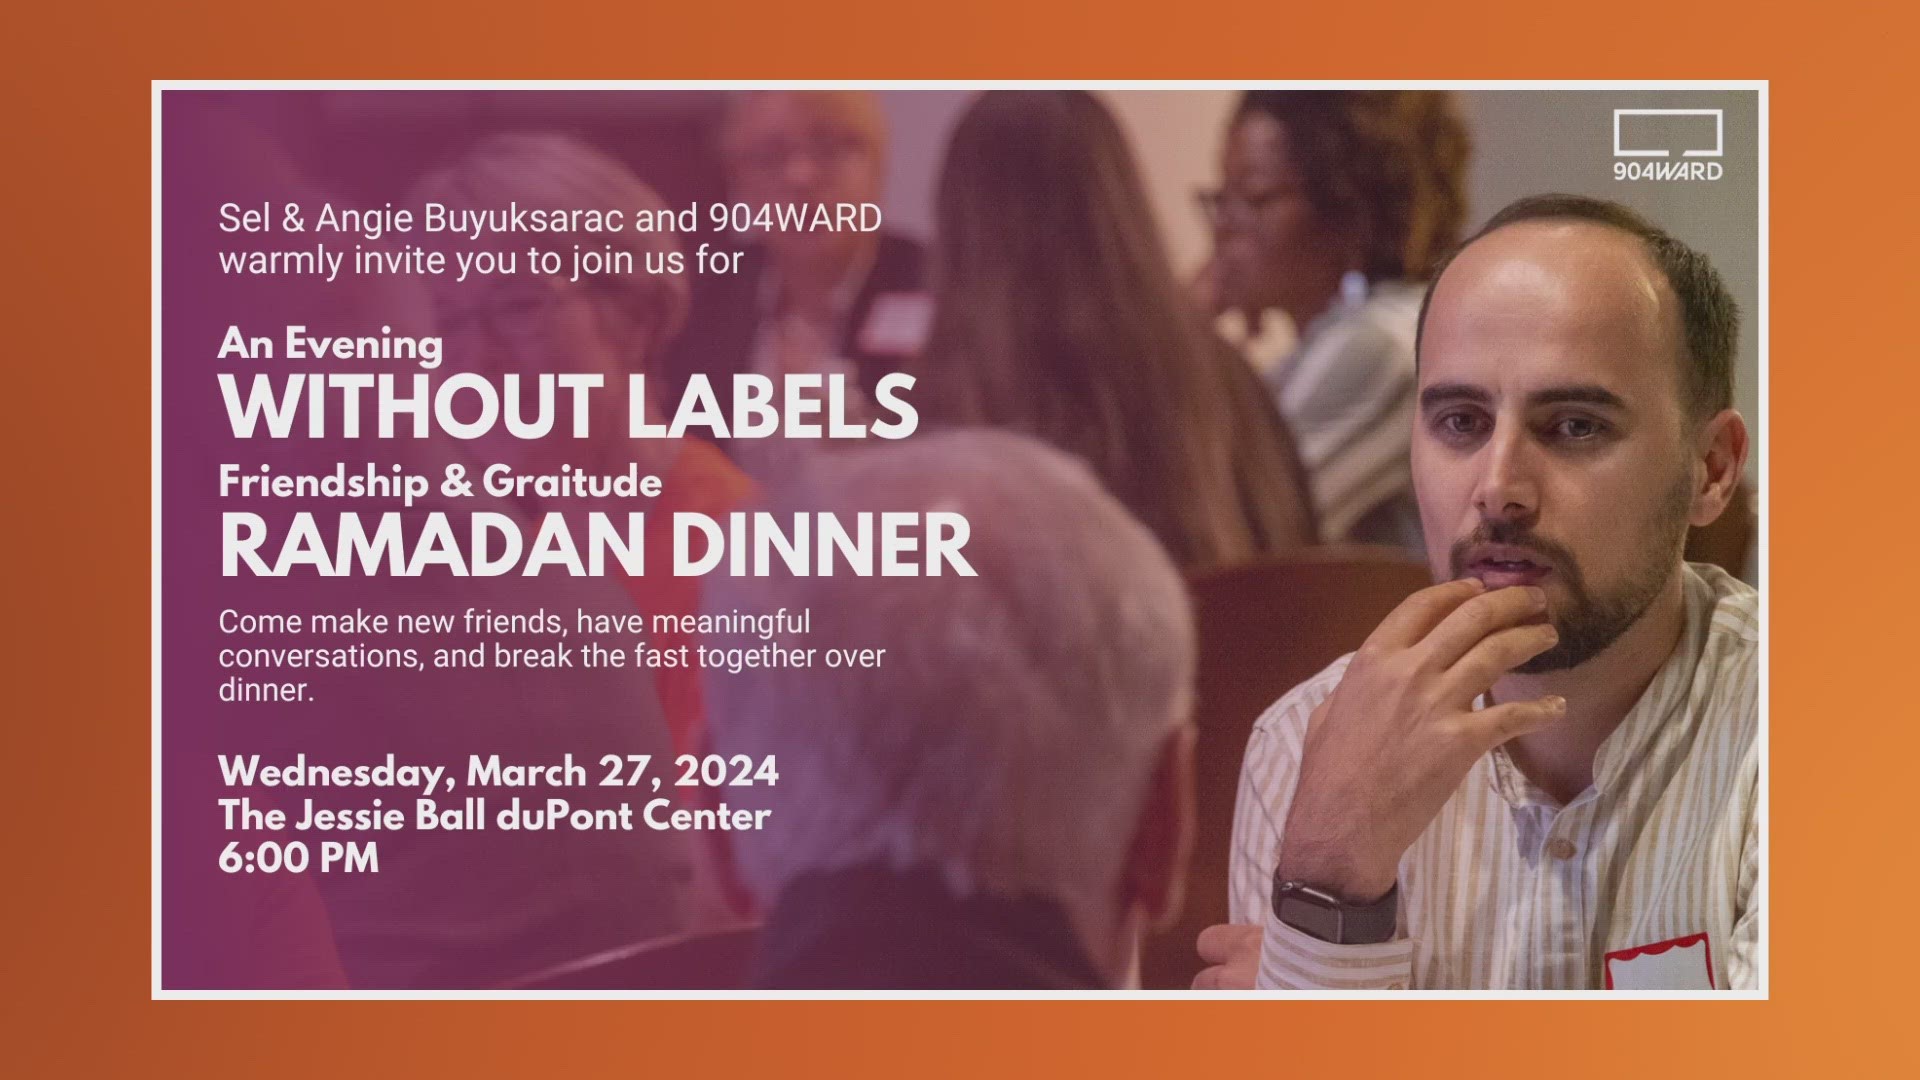 There will be three dinner events in Jacksonville to celebrate Ramadan. For more information on the Experience Ramadan dinner visit here: